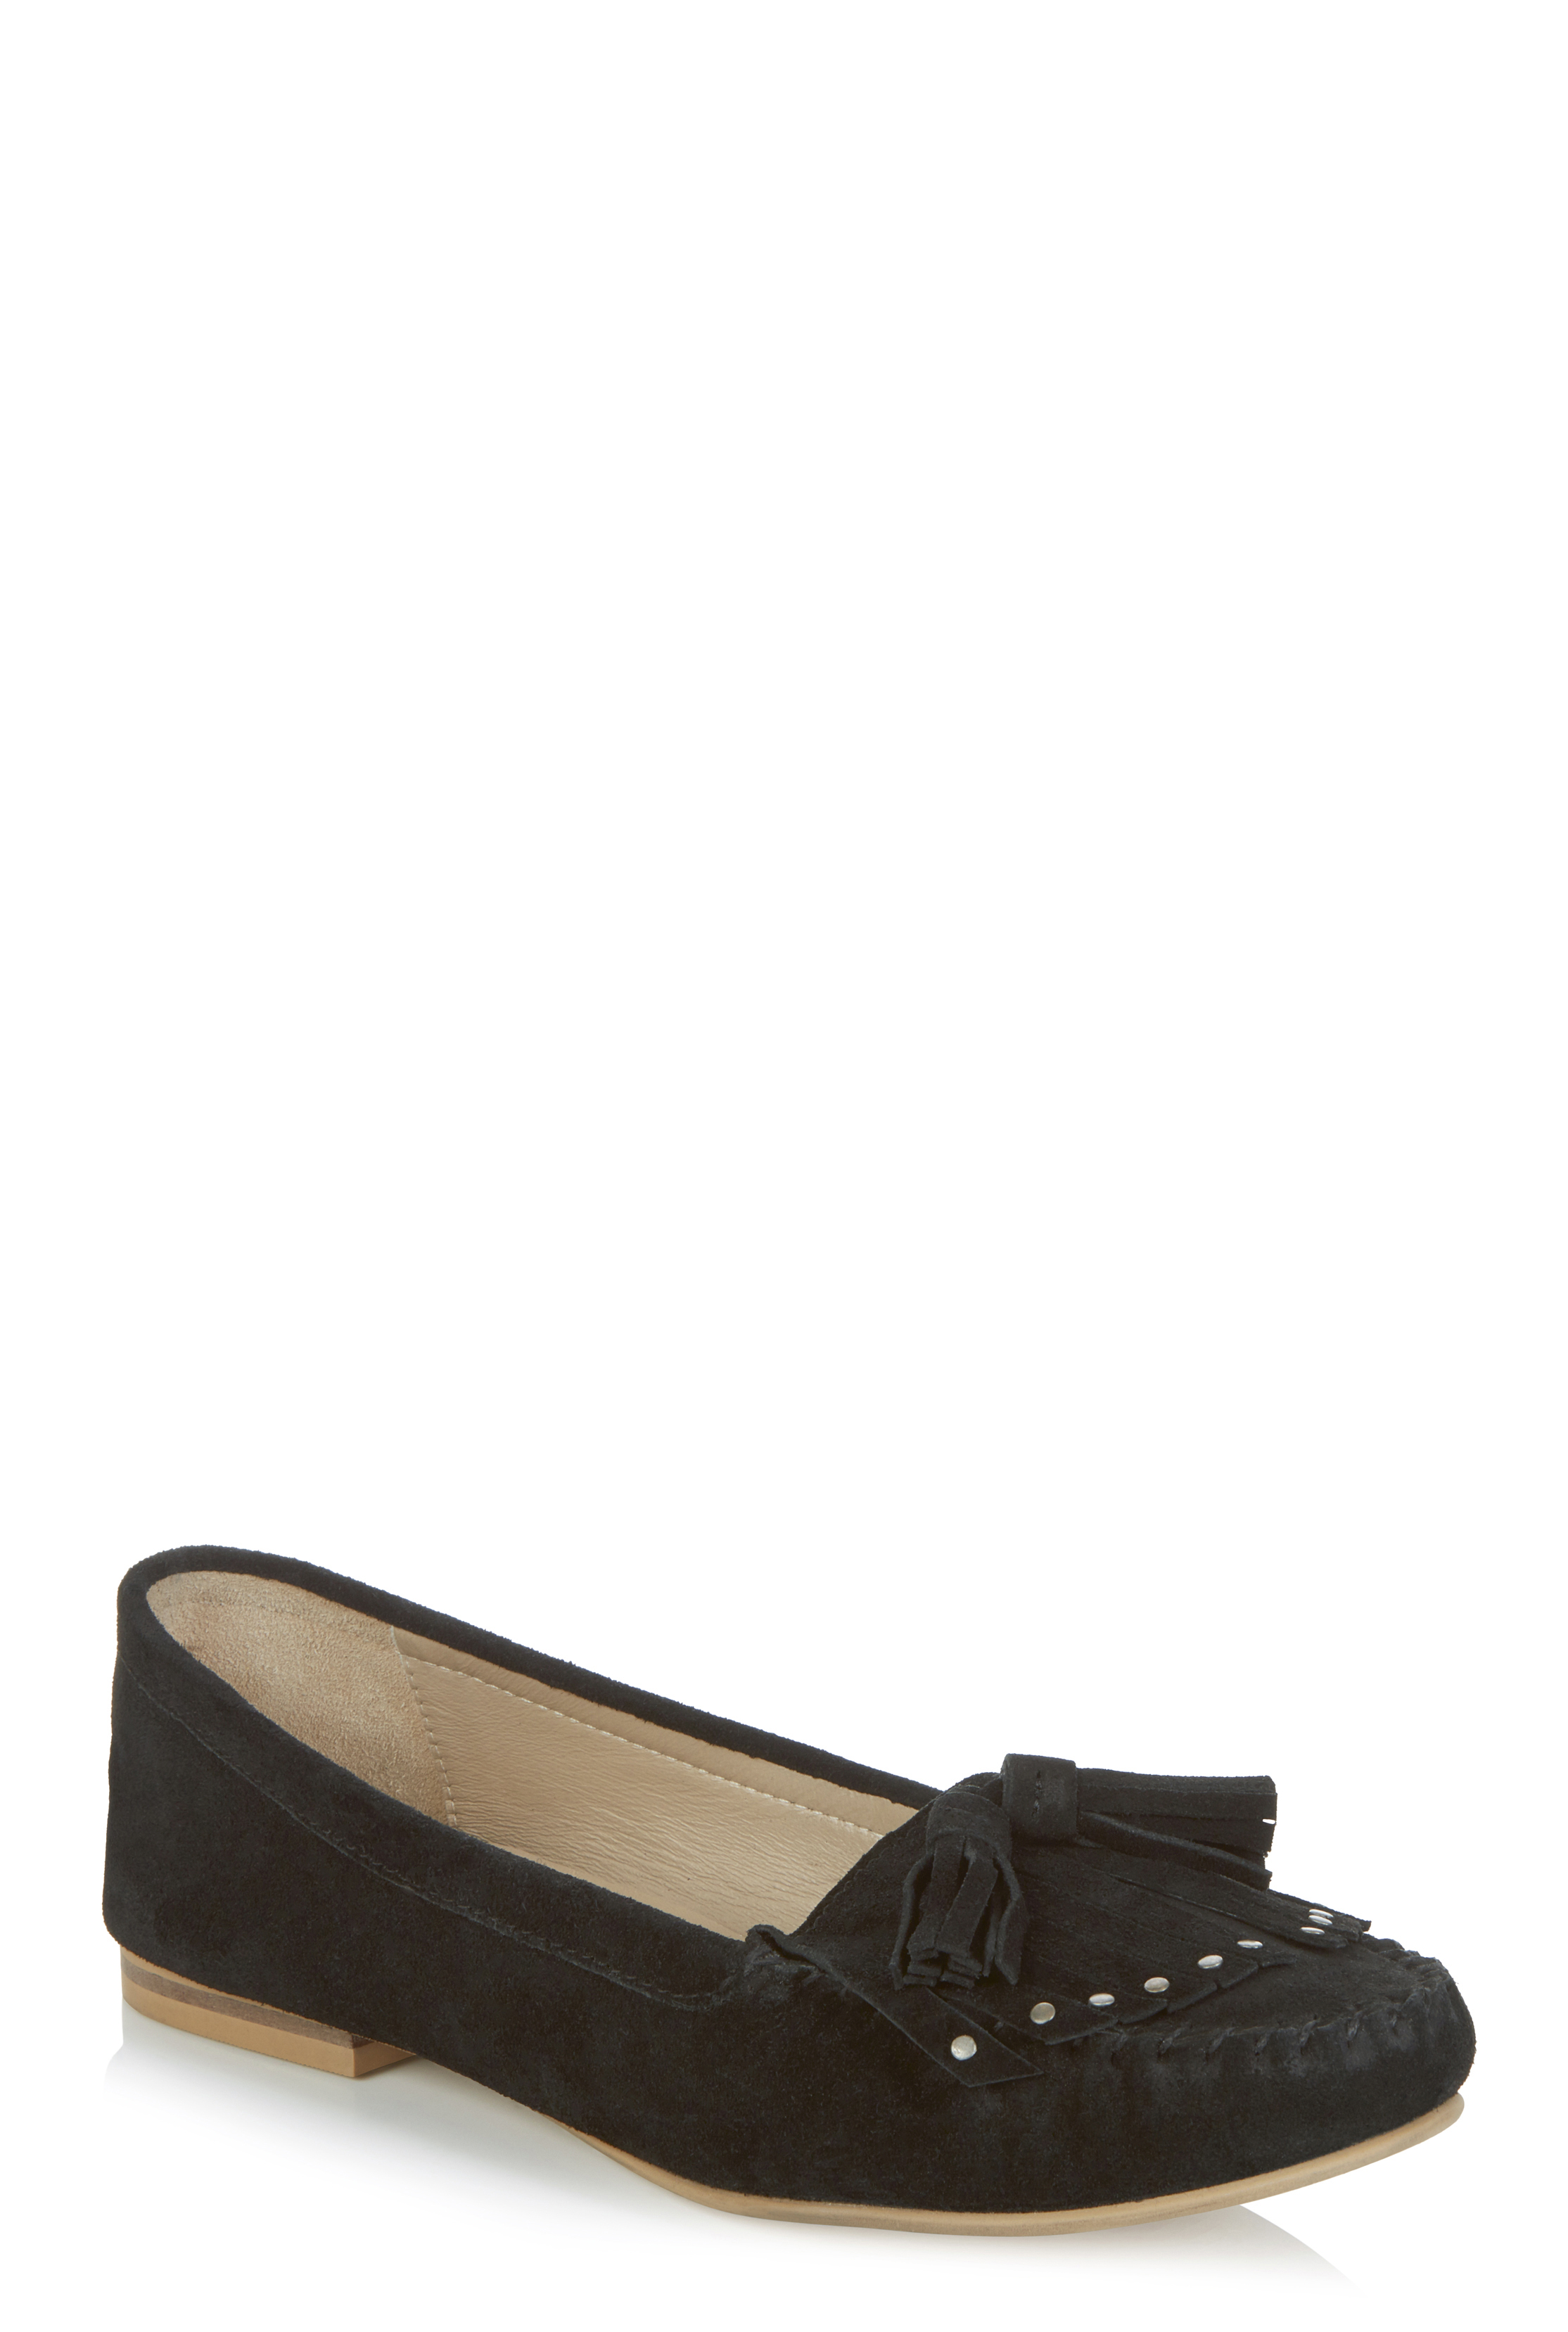 LTS Izzie Suede Moccasin | Long Tall Sally